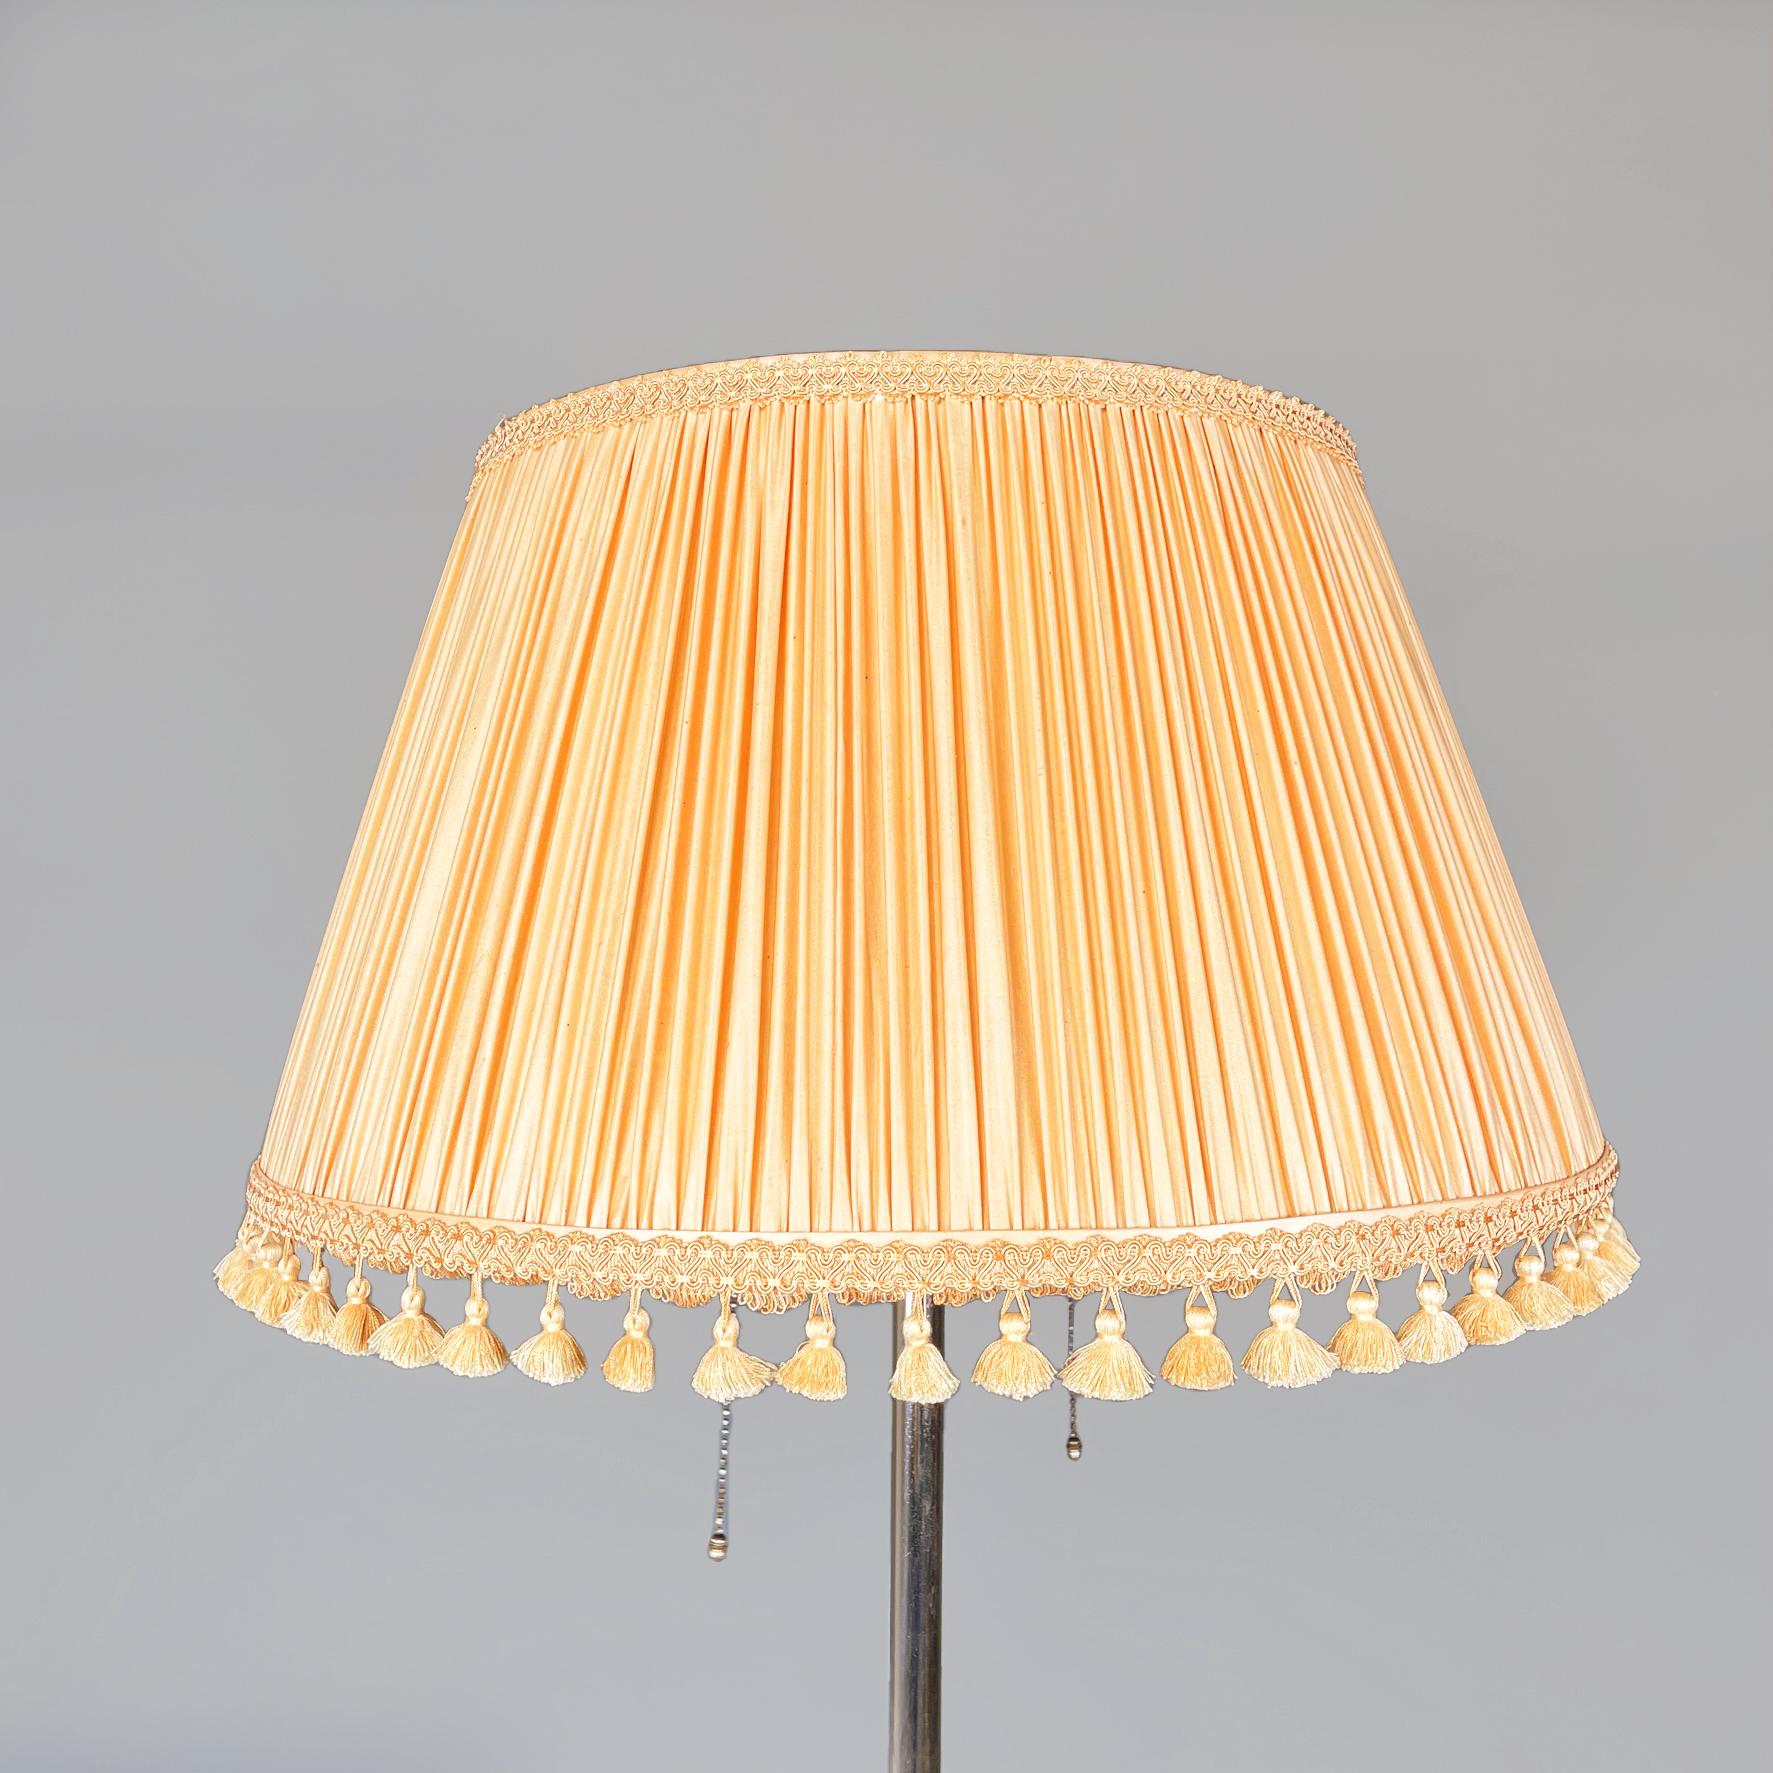 Italian Floor Lamp in Peach Pink Pleated Fabric, Black Metal, 1920s-1930s In Good Condition For Sale In MIlano, IT